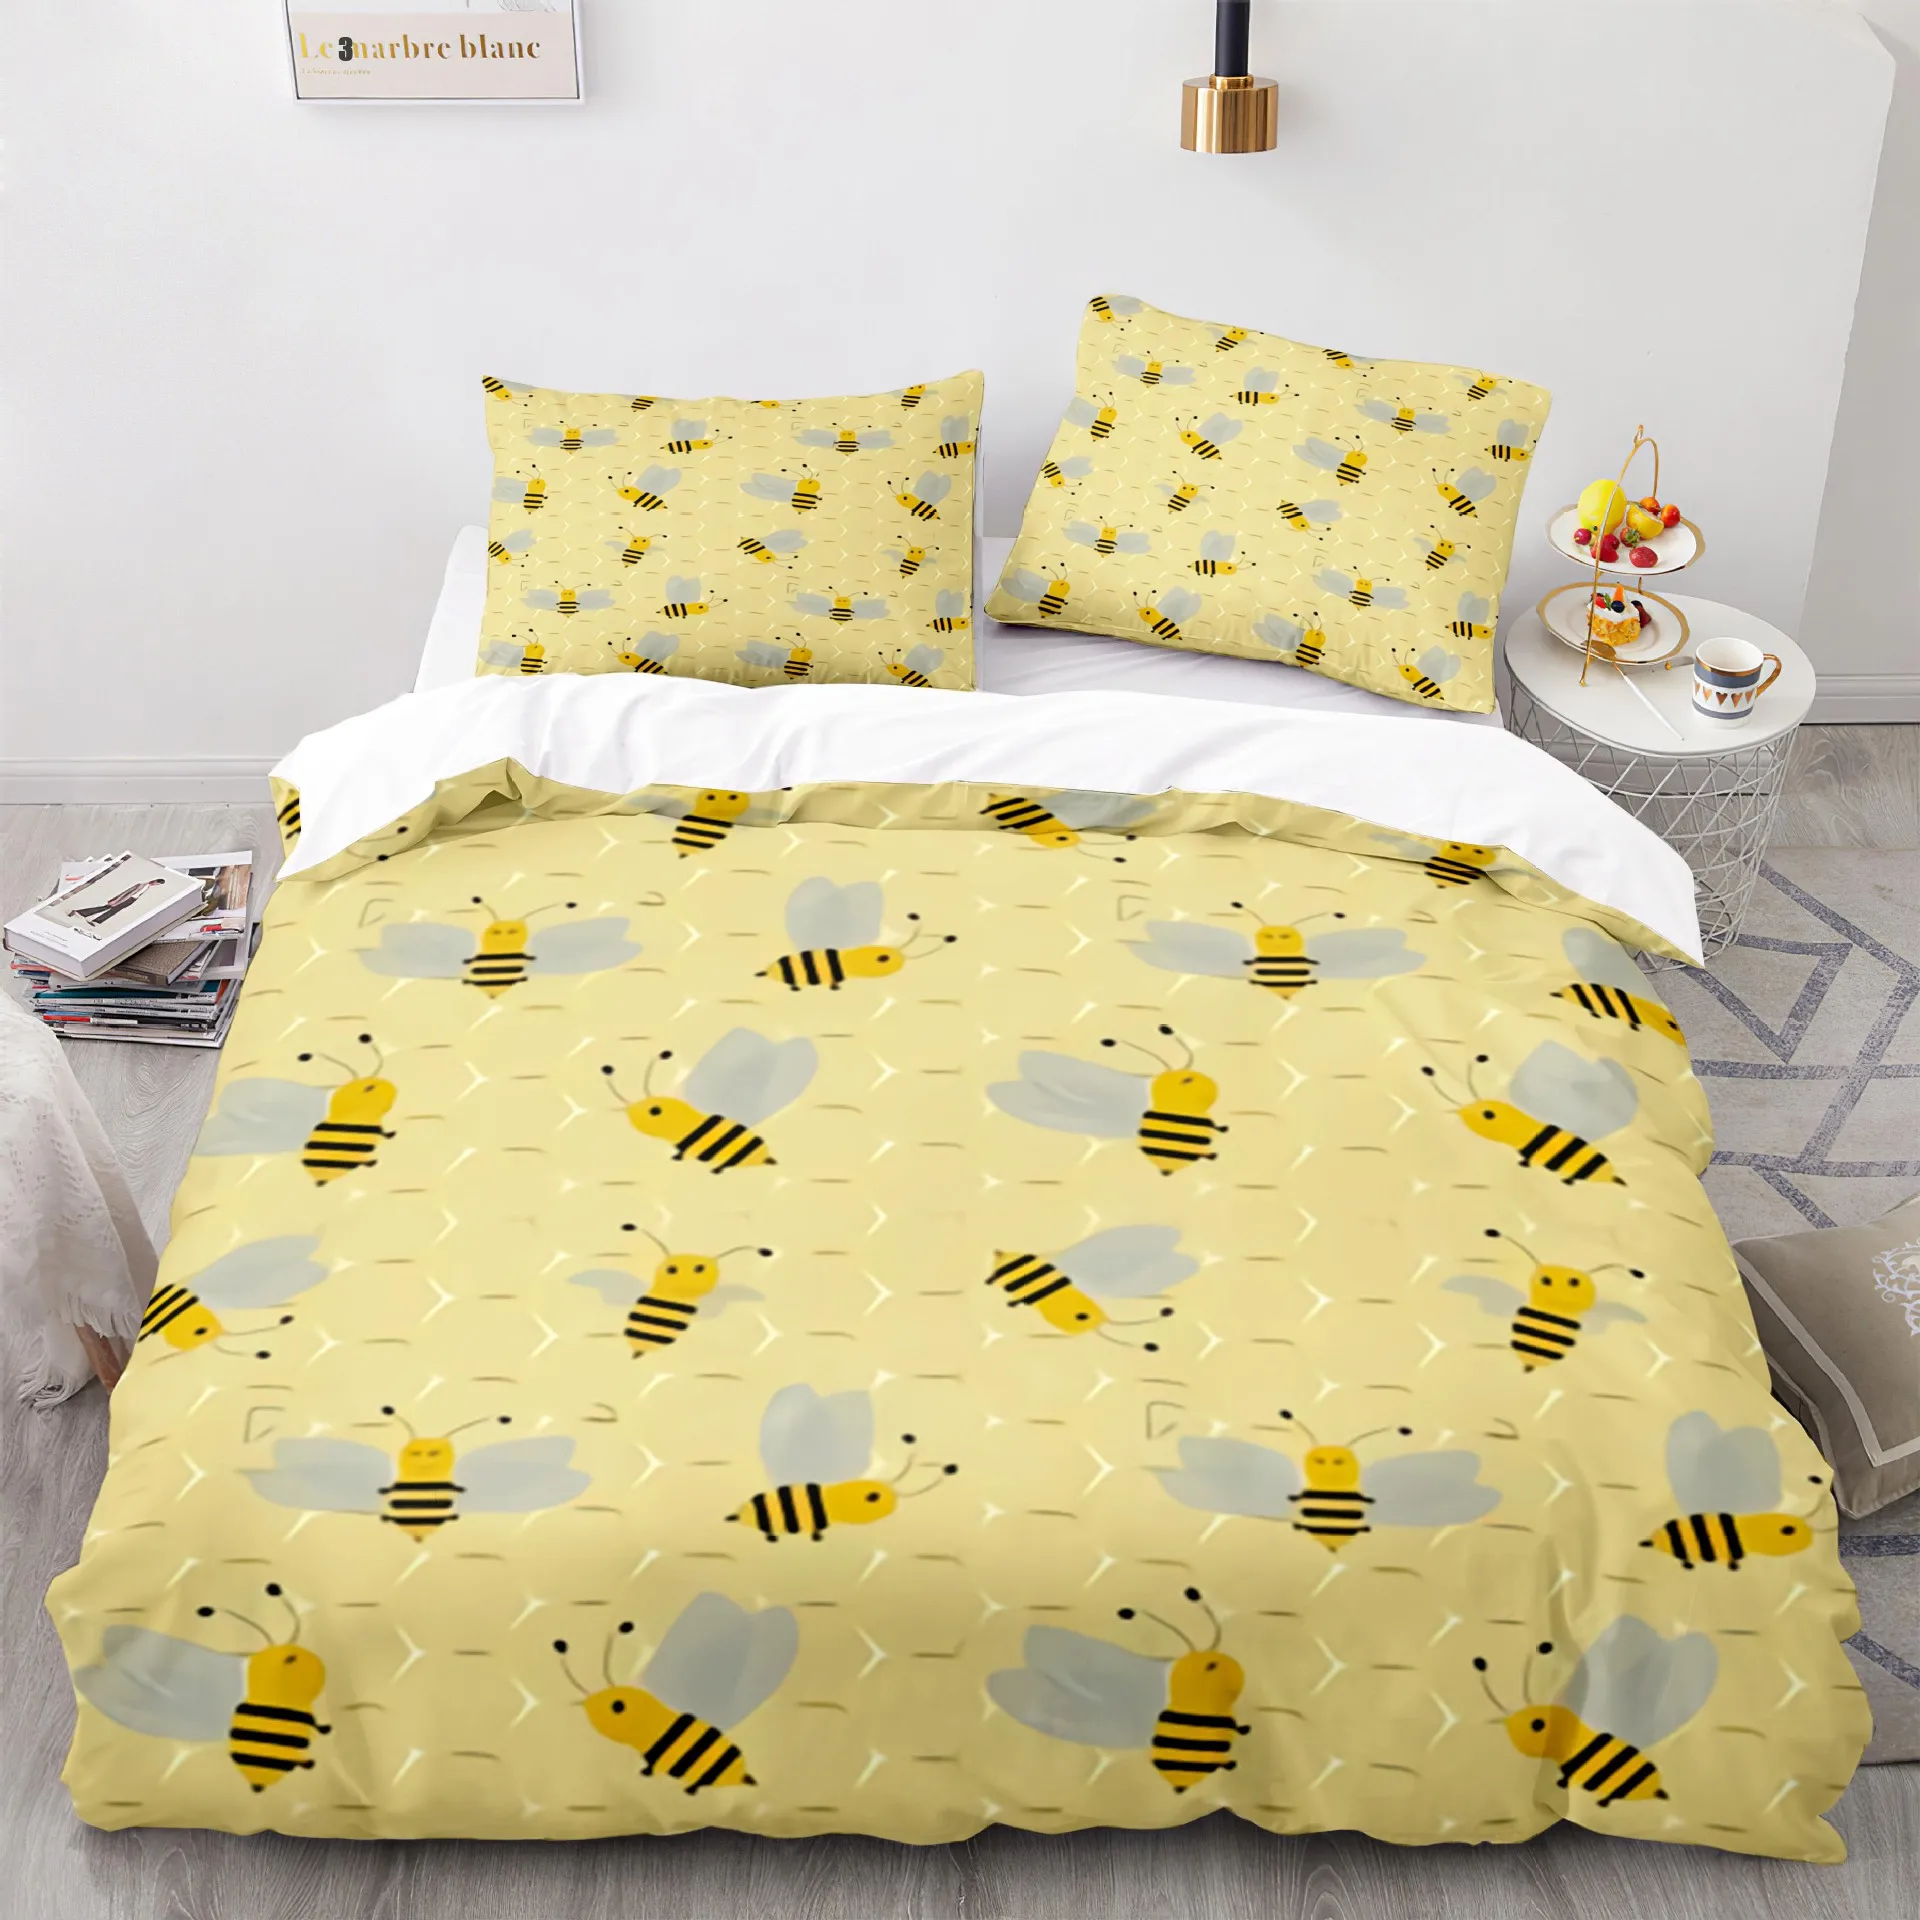 

Honey Bee Duvet Cover Set, Black White Printing 3 Piece Bedding Set,for Girls Boys Twin/Full/Queen/King Size Crown Quilt Cover